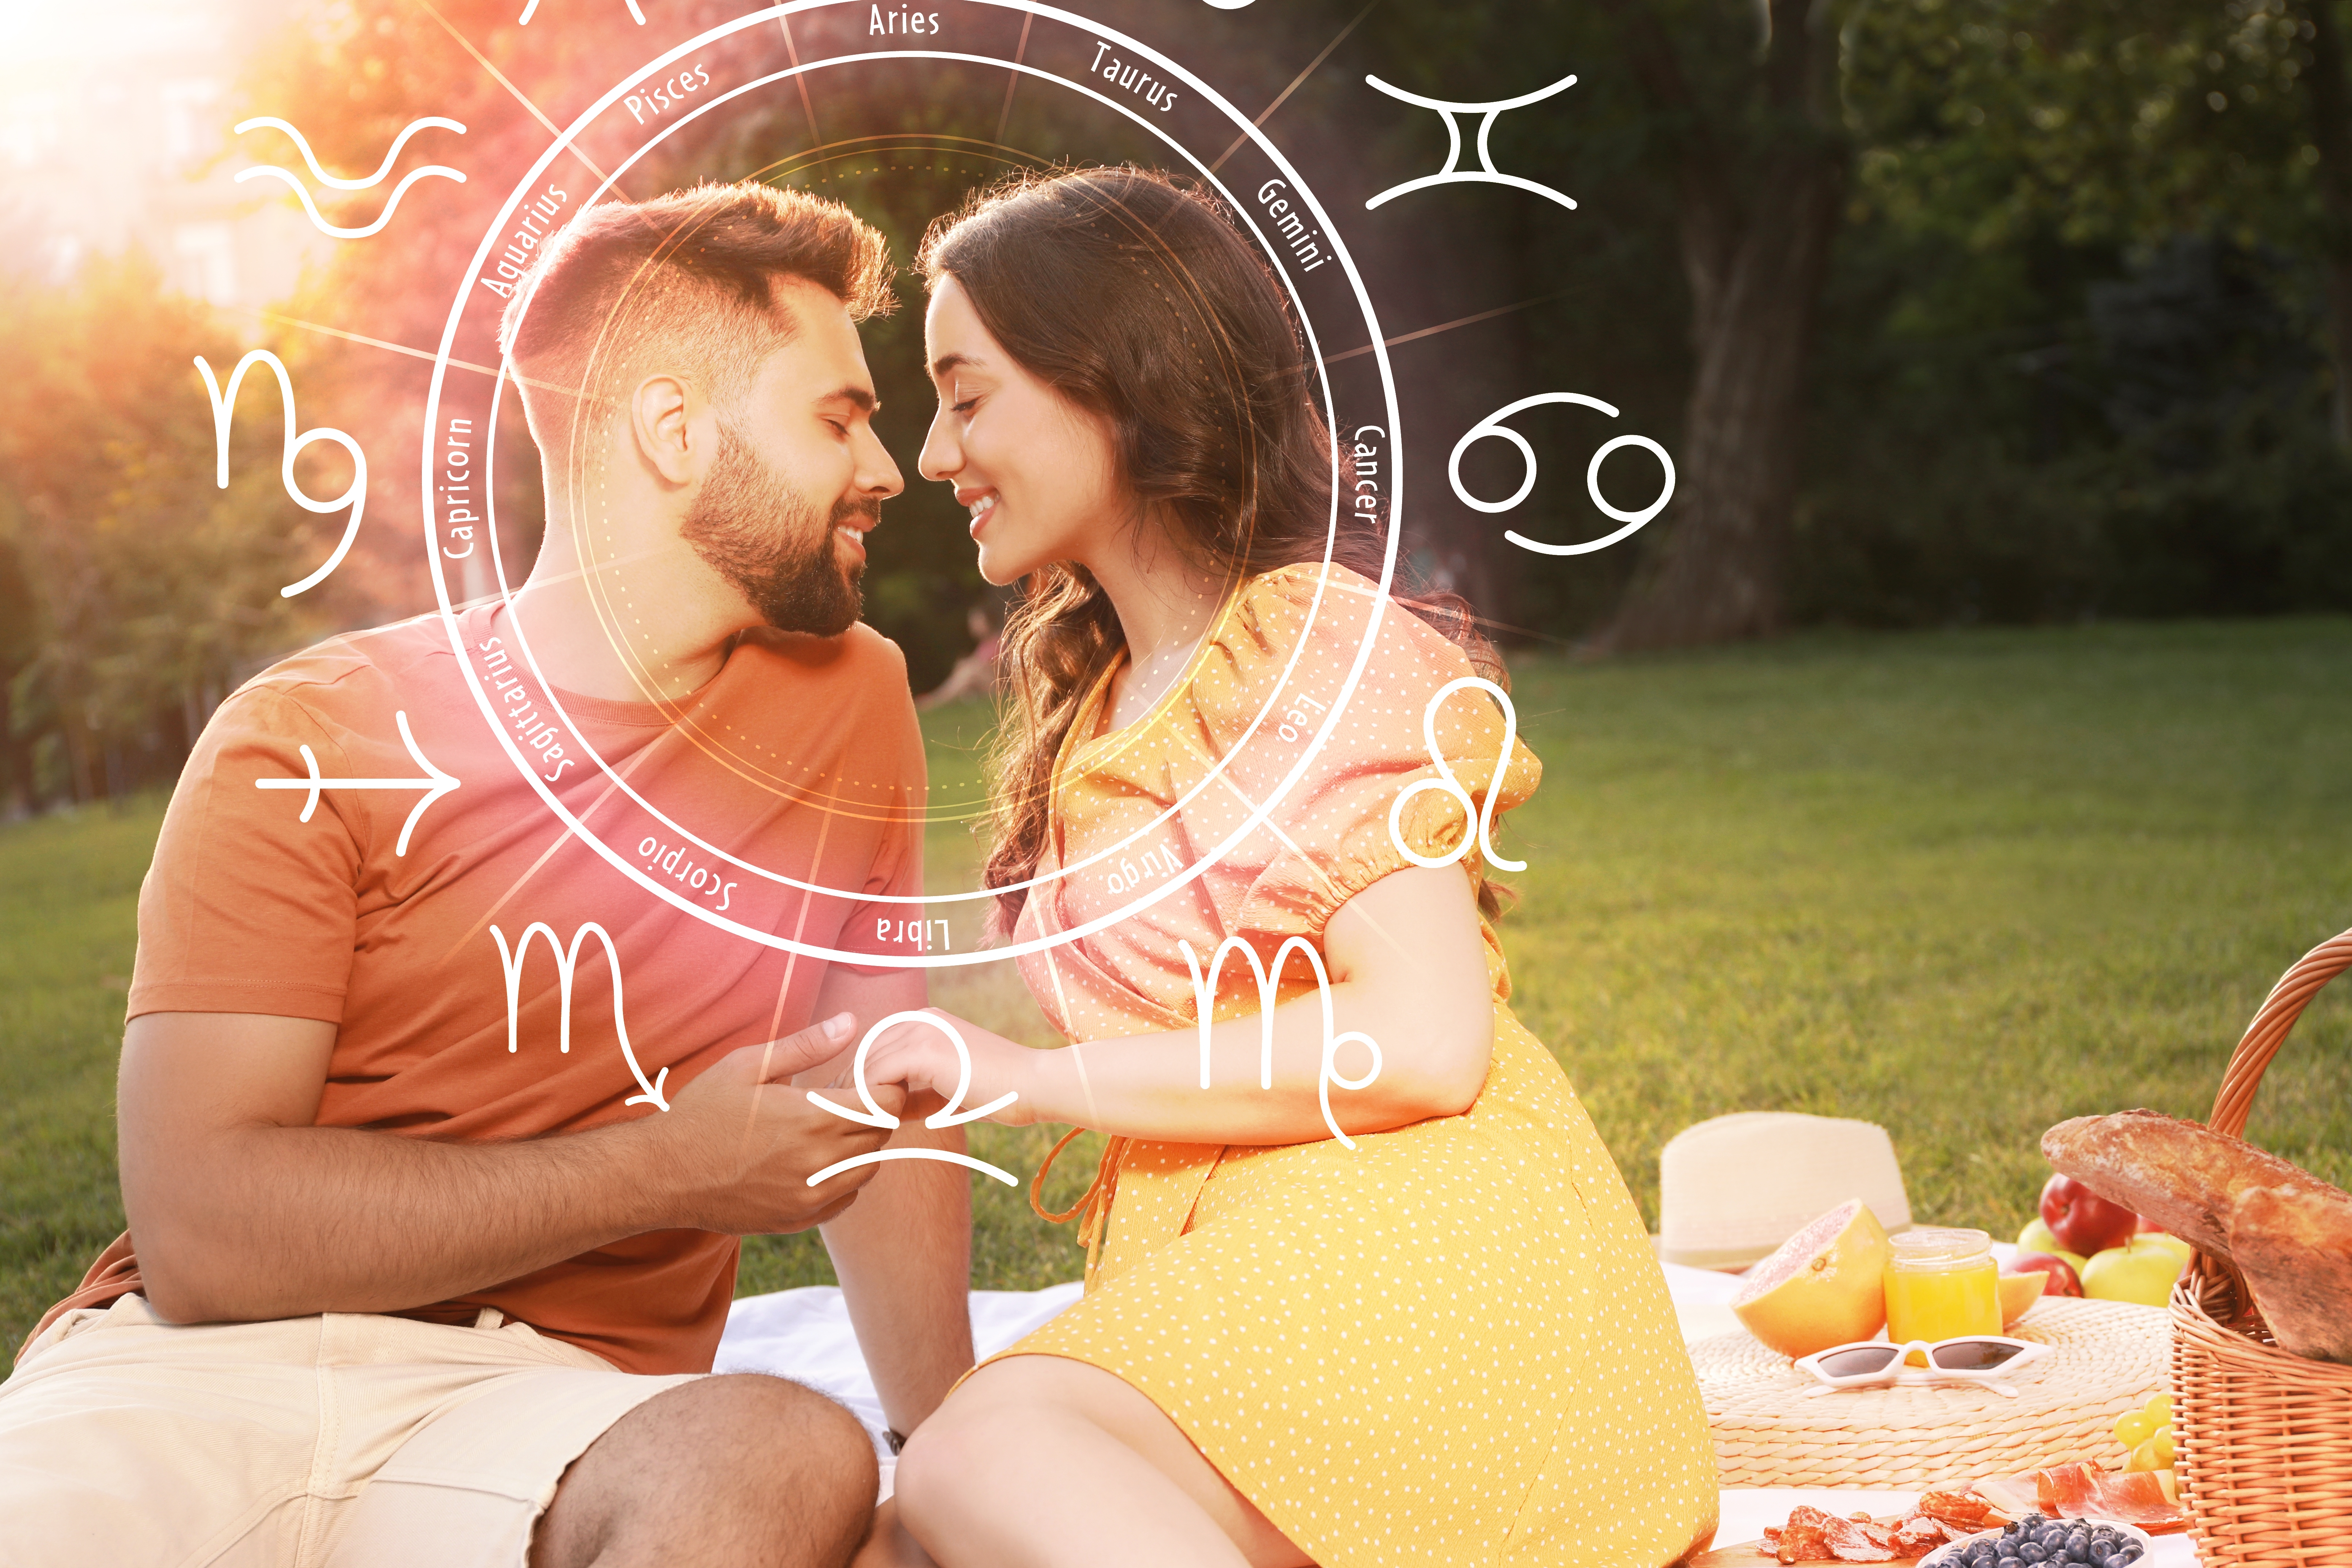 Loving couple outdoors and zodiac wheel | Source: Shutterstock